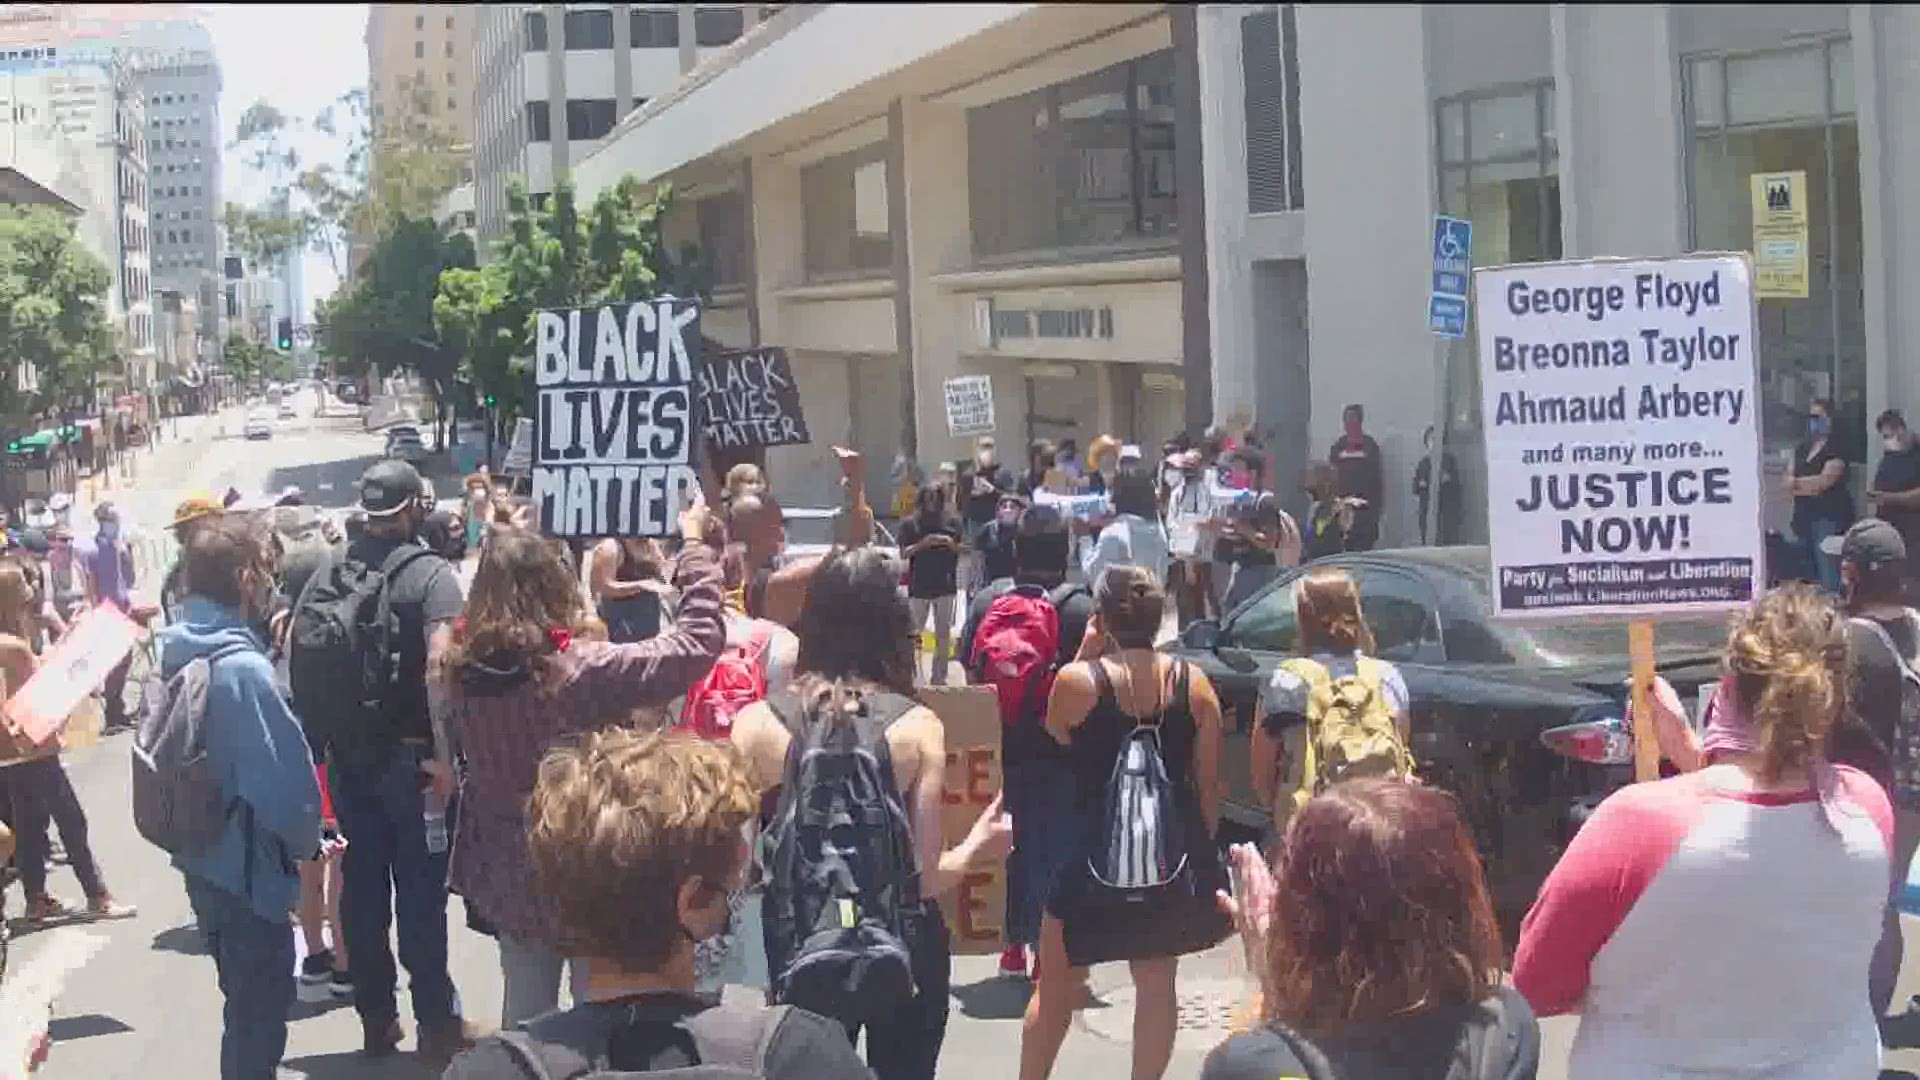 Around 3:45 p.m., SDPD reported that the demonstrators had left the area of headquarters. There were no arrests, incidents or injuries, according to authorities.